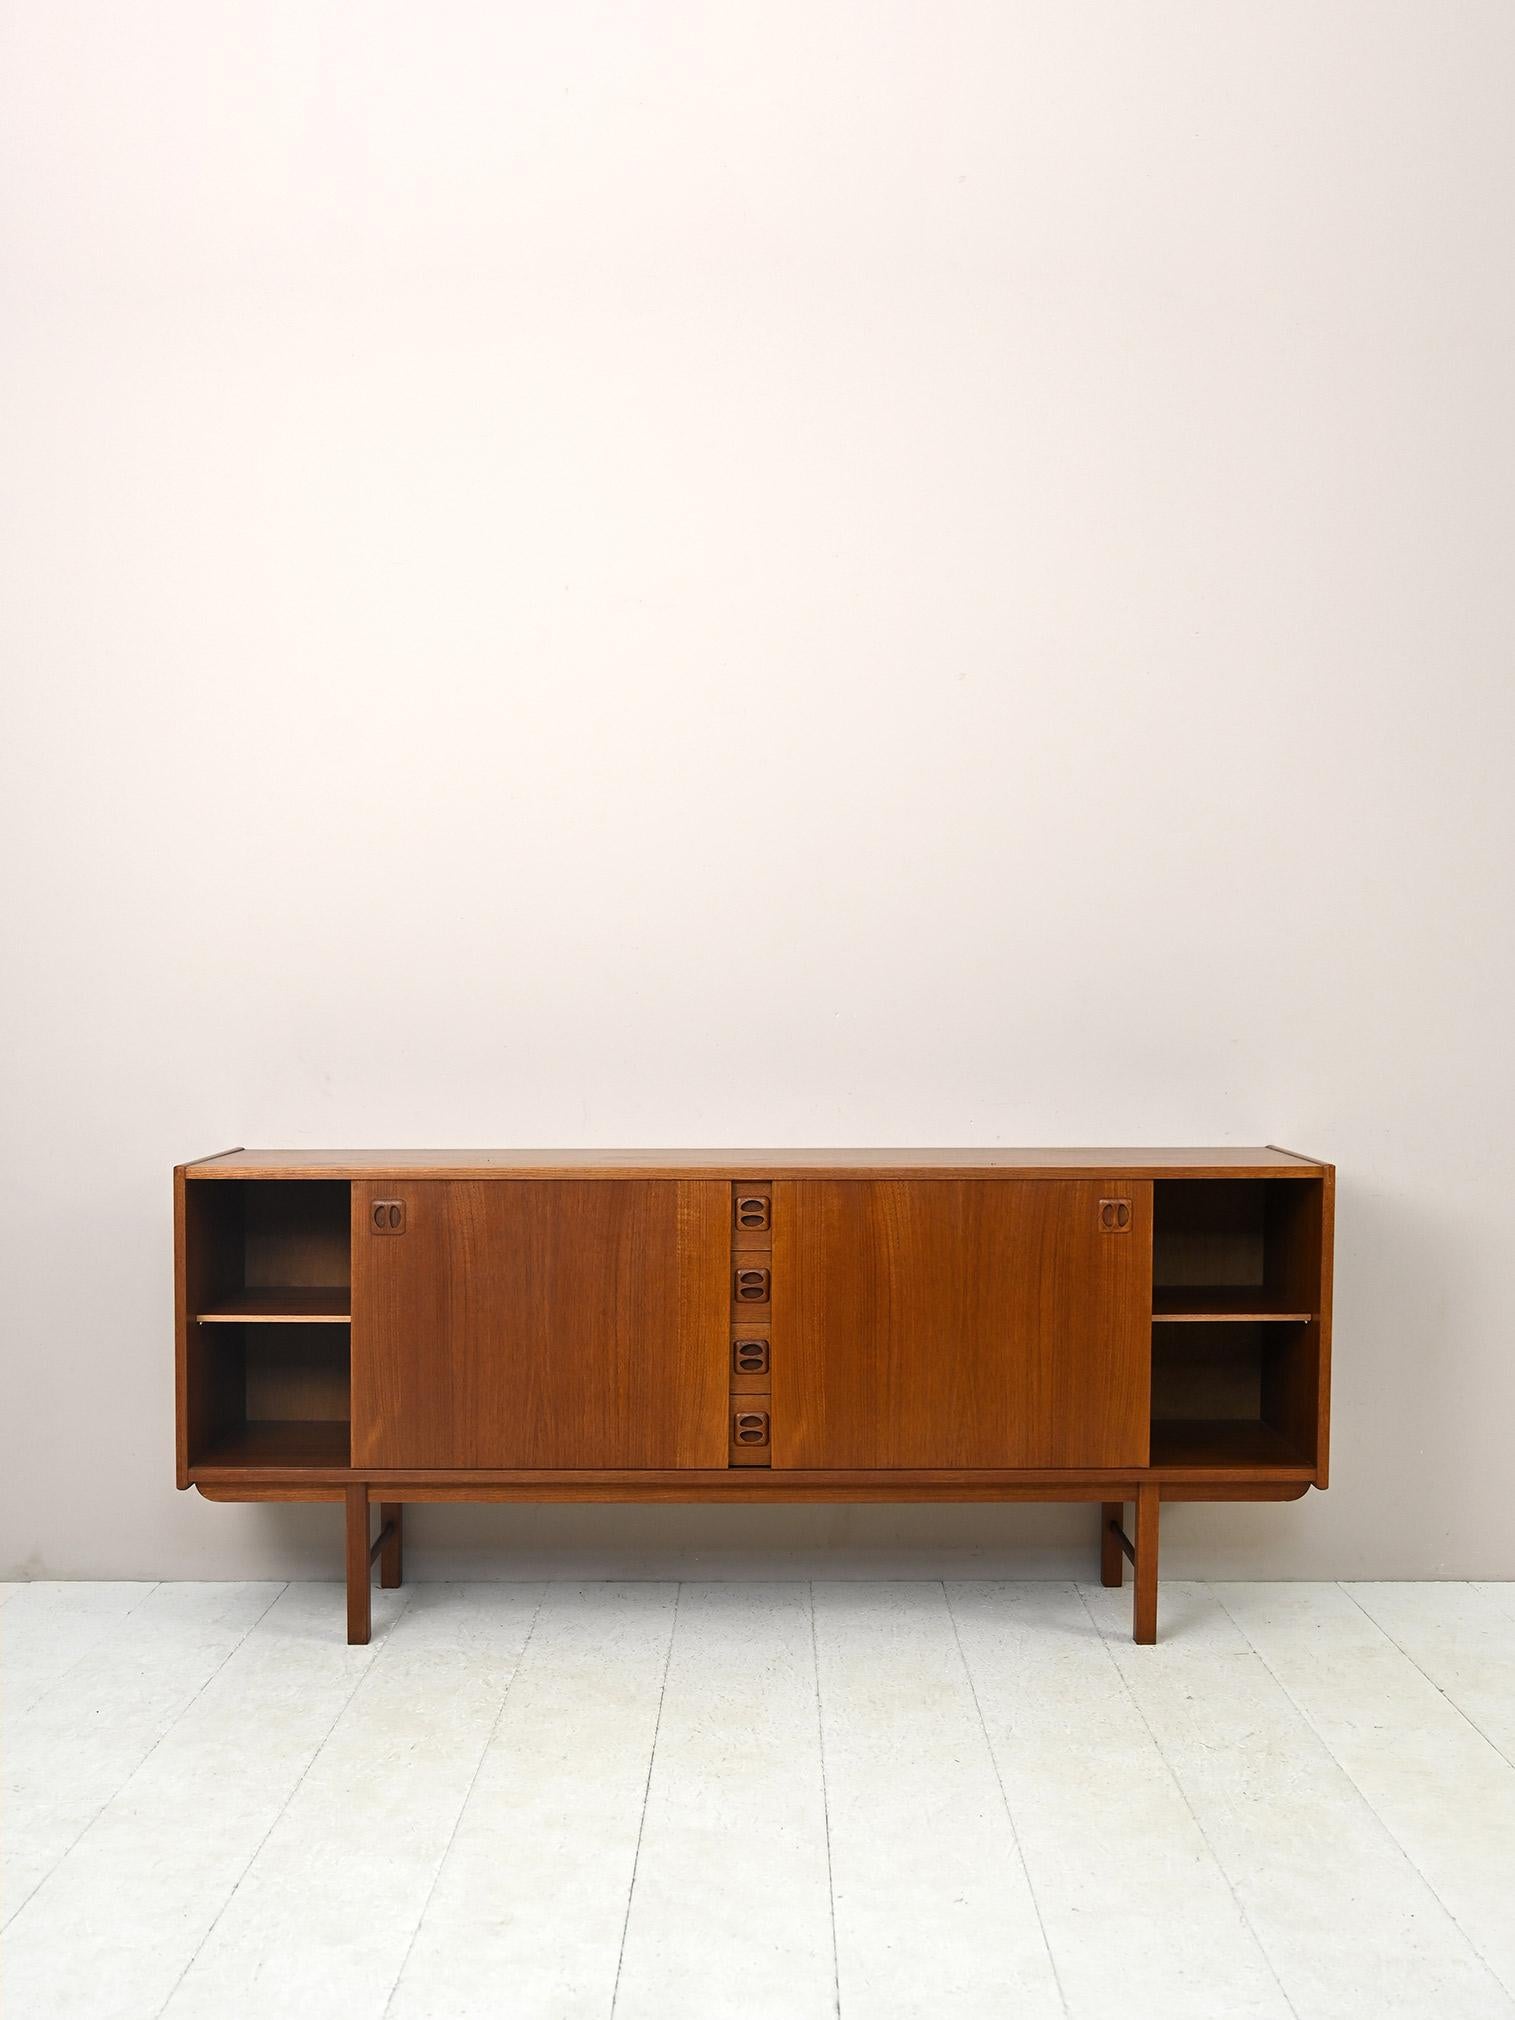 Modernist sideboard of Scandinavian manufacture.

A piece of furniture with Nordic flavor and old-world warmth. The minimal and classic lines are enhanced by the carved wooden handle of the drawers and sliding doors.
The bold shade of teak wood